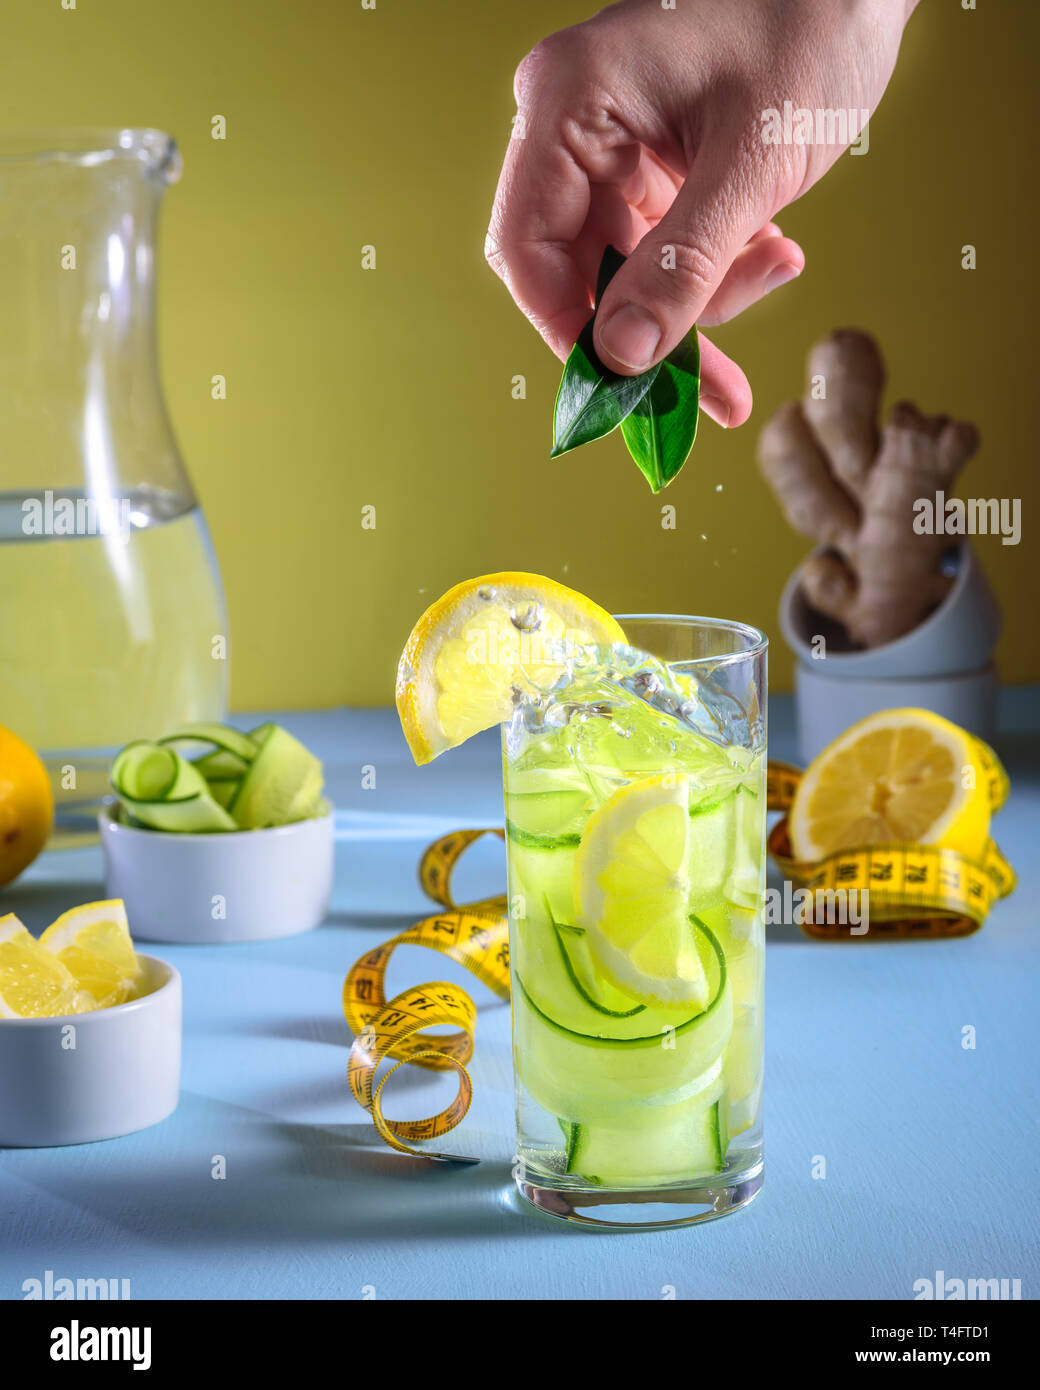 Detox drink, lemon and cucumber water. Dieting concept Stock Photo